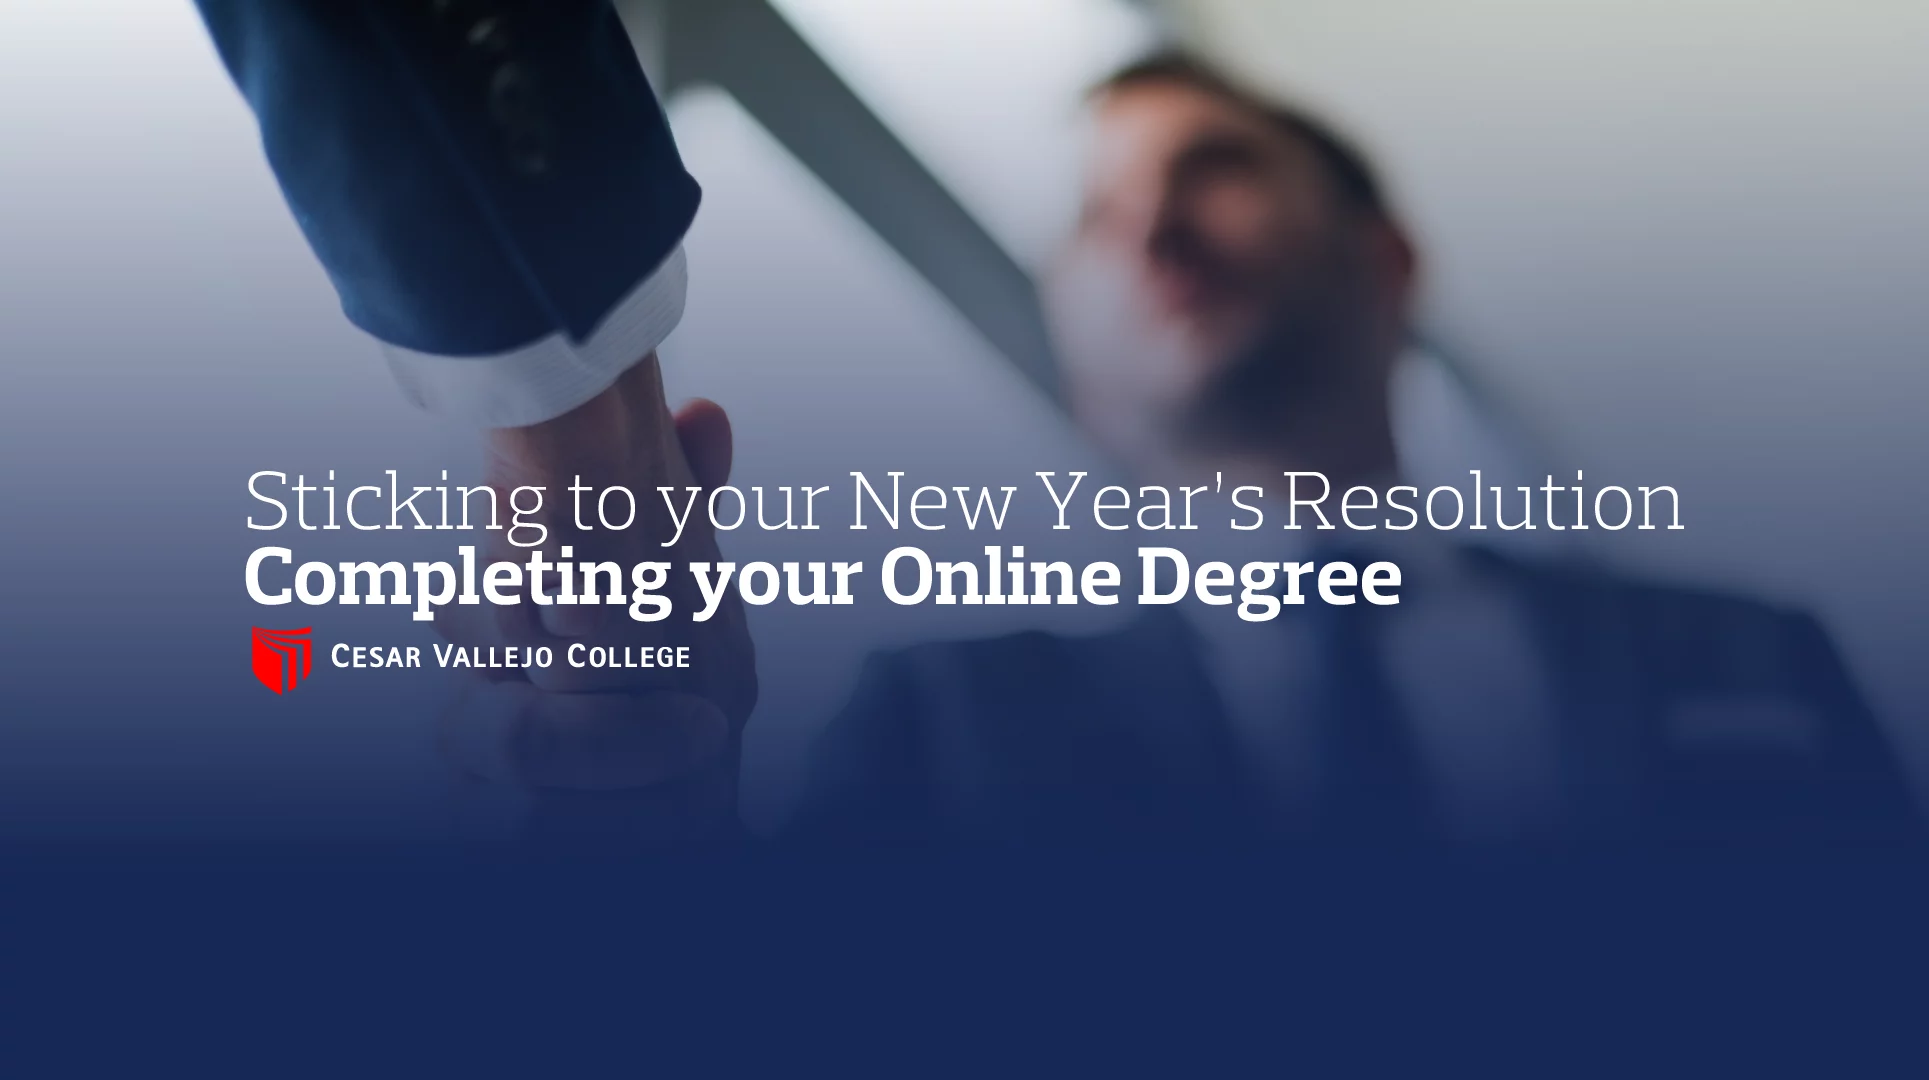 Sticking to your New Year's Resolution, Online Degree